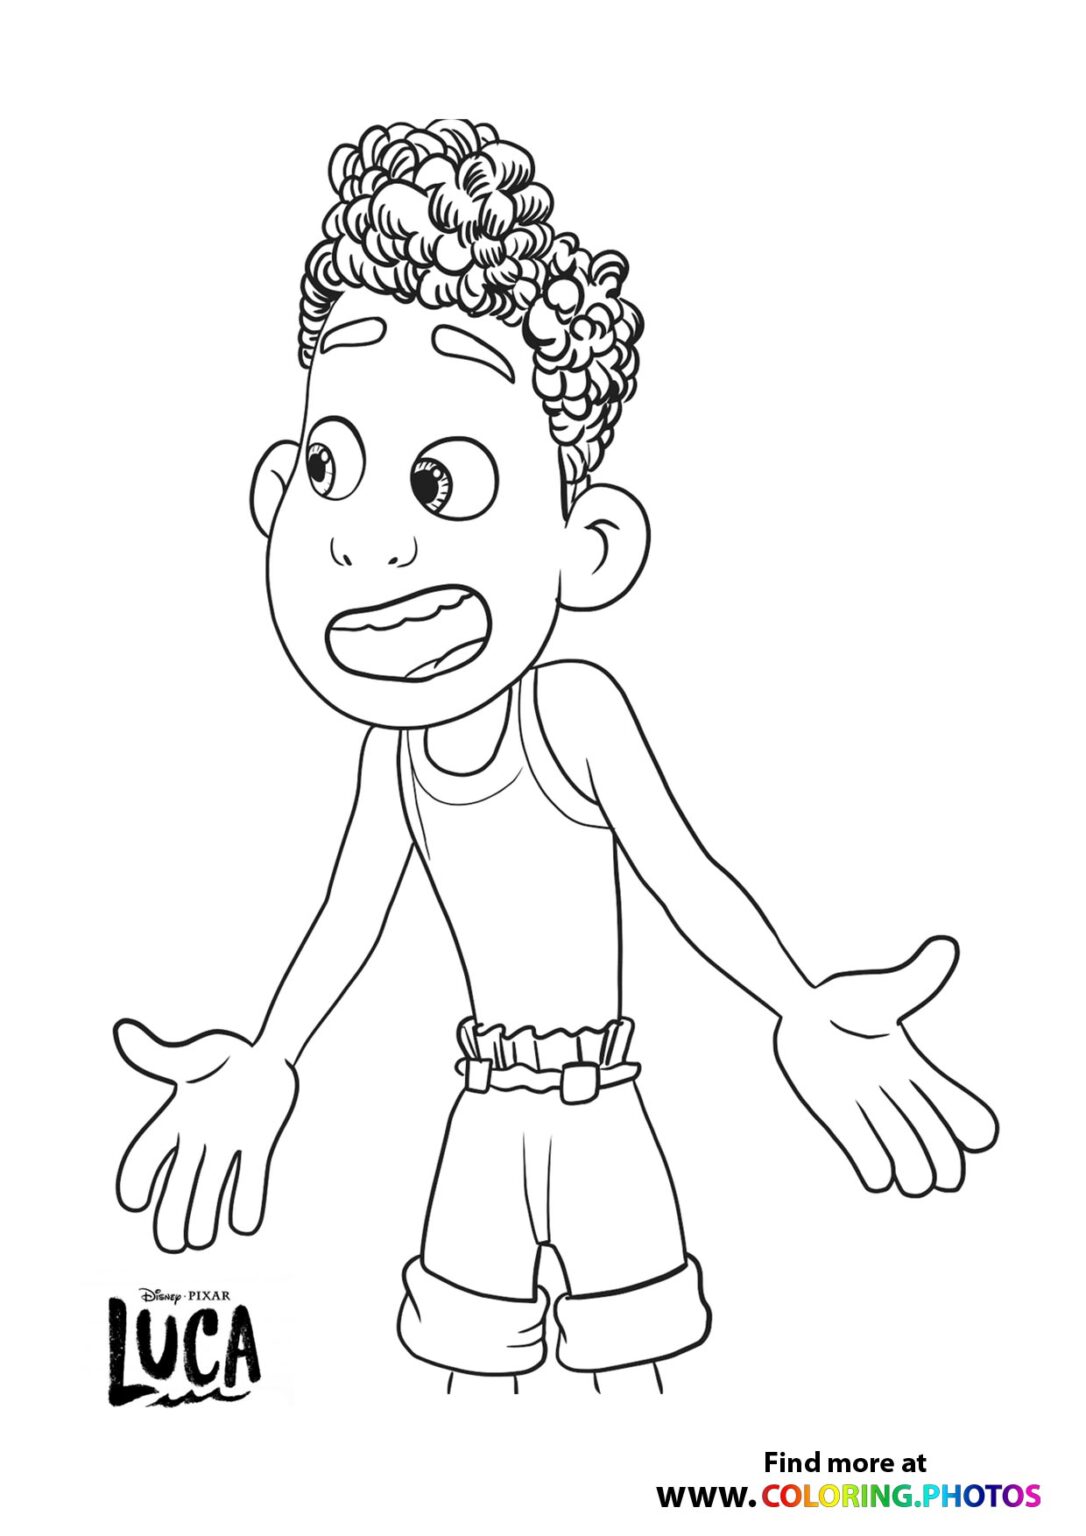 Silenzio Bruno! Disney Luca - Coloring Pages for kids